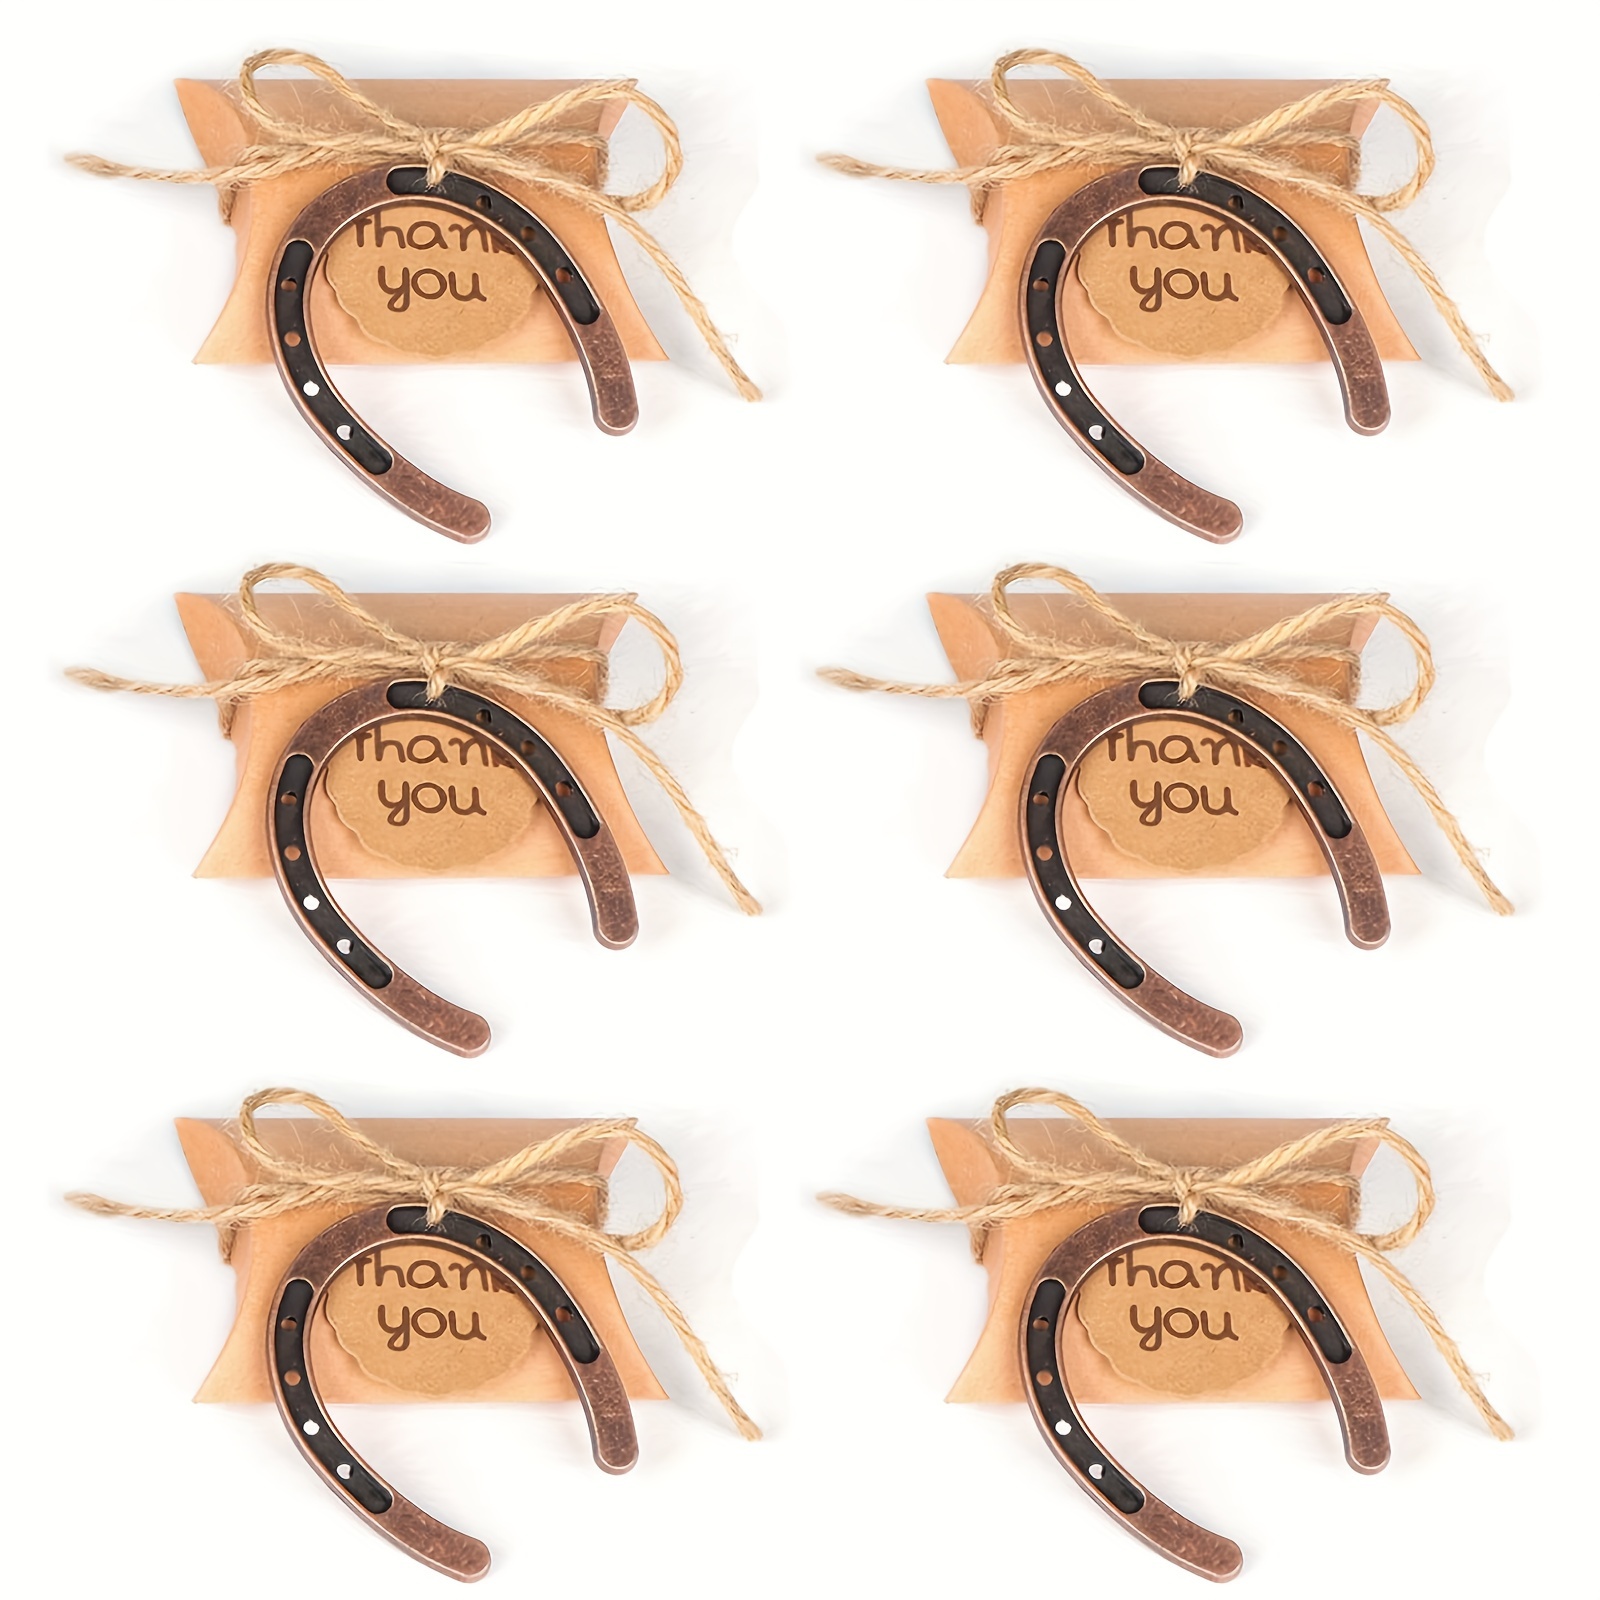 

24-piece Rustic Horseshoe Wedding Favor Set - Includes 6 Kraft Paper Gift Boxes, 6 Vintage Horseshoes, 6 Cards & 6 Ribbons For Decorations